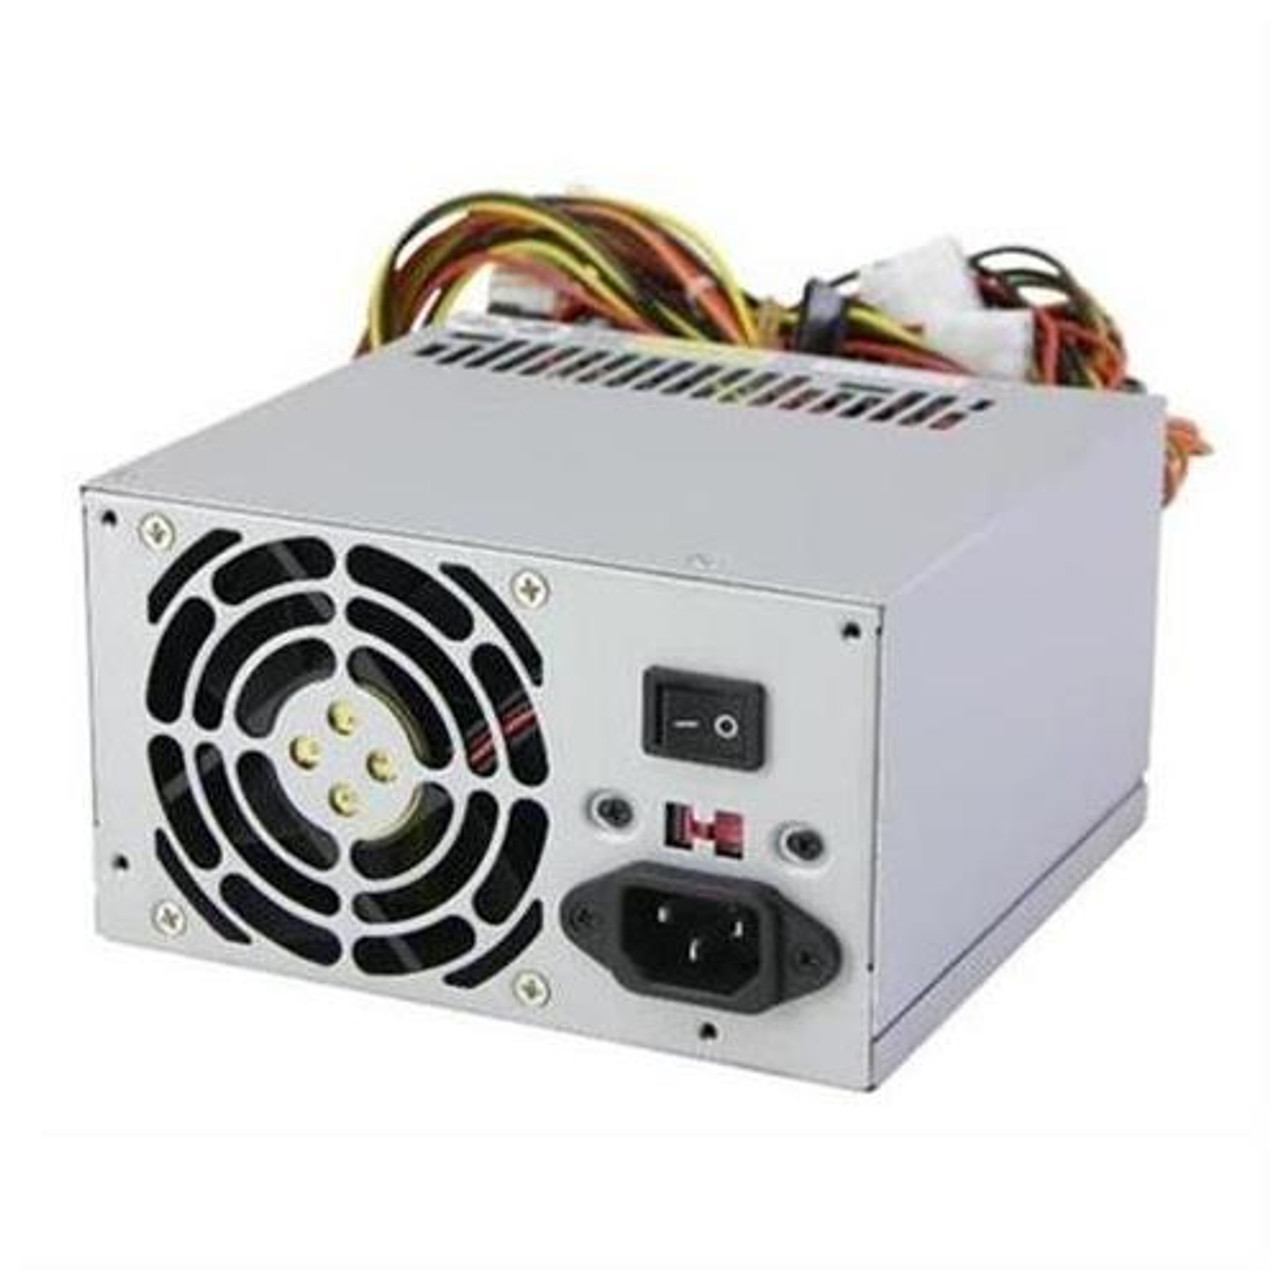 1K45H Dell 635-Watts Hot Swap Power Supply for Precision T5600 WorkStation